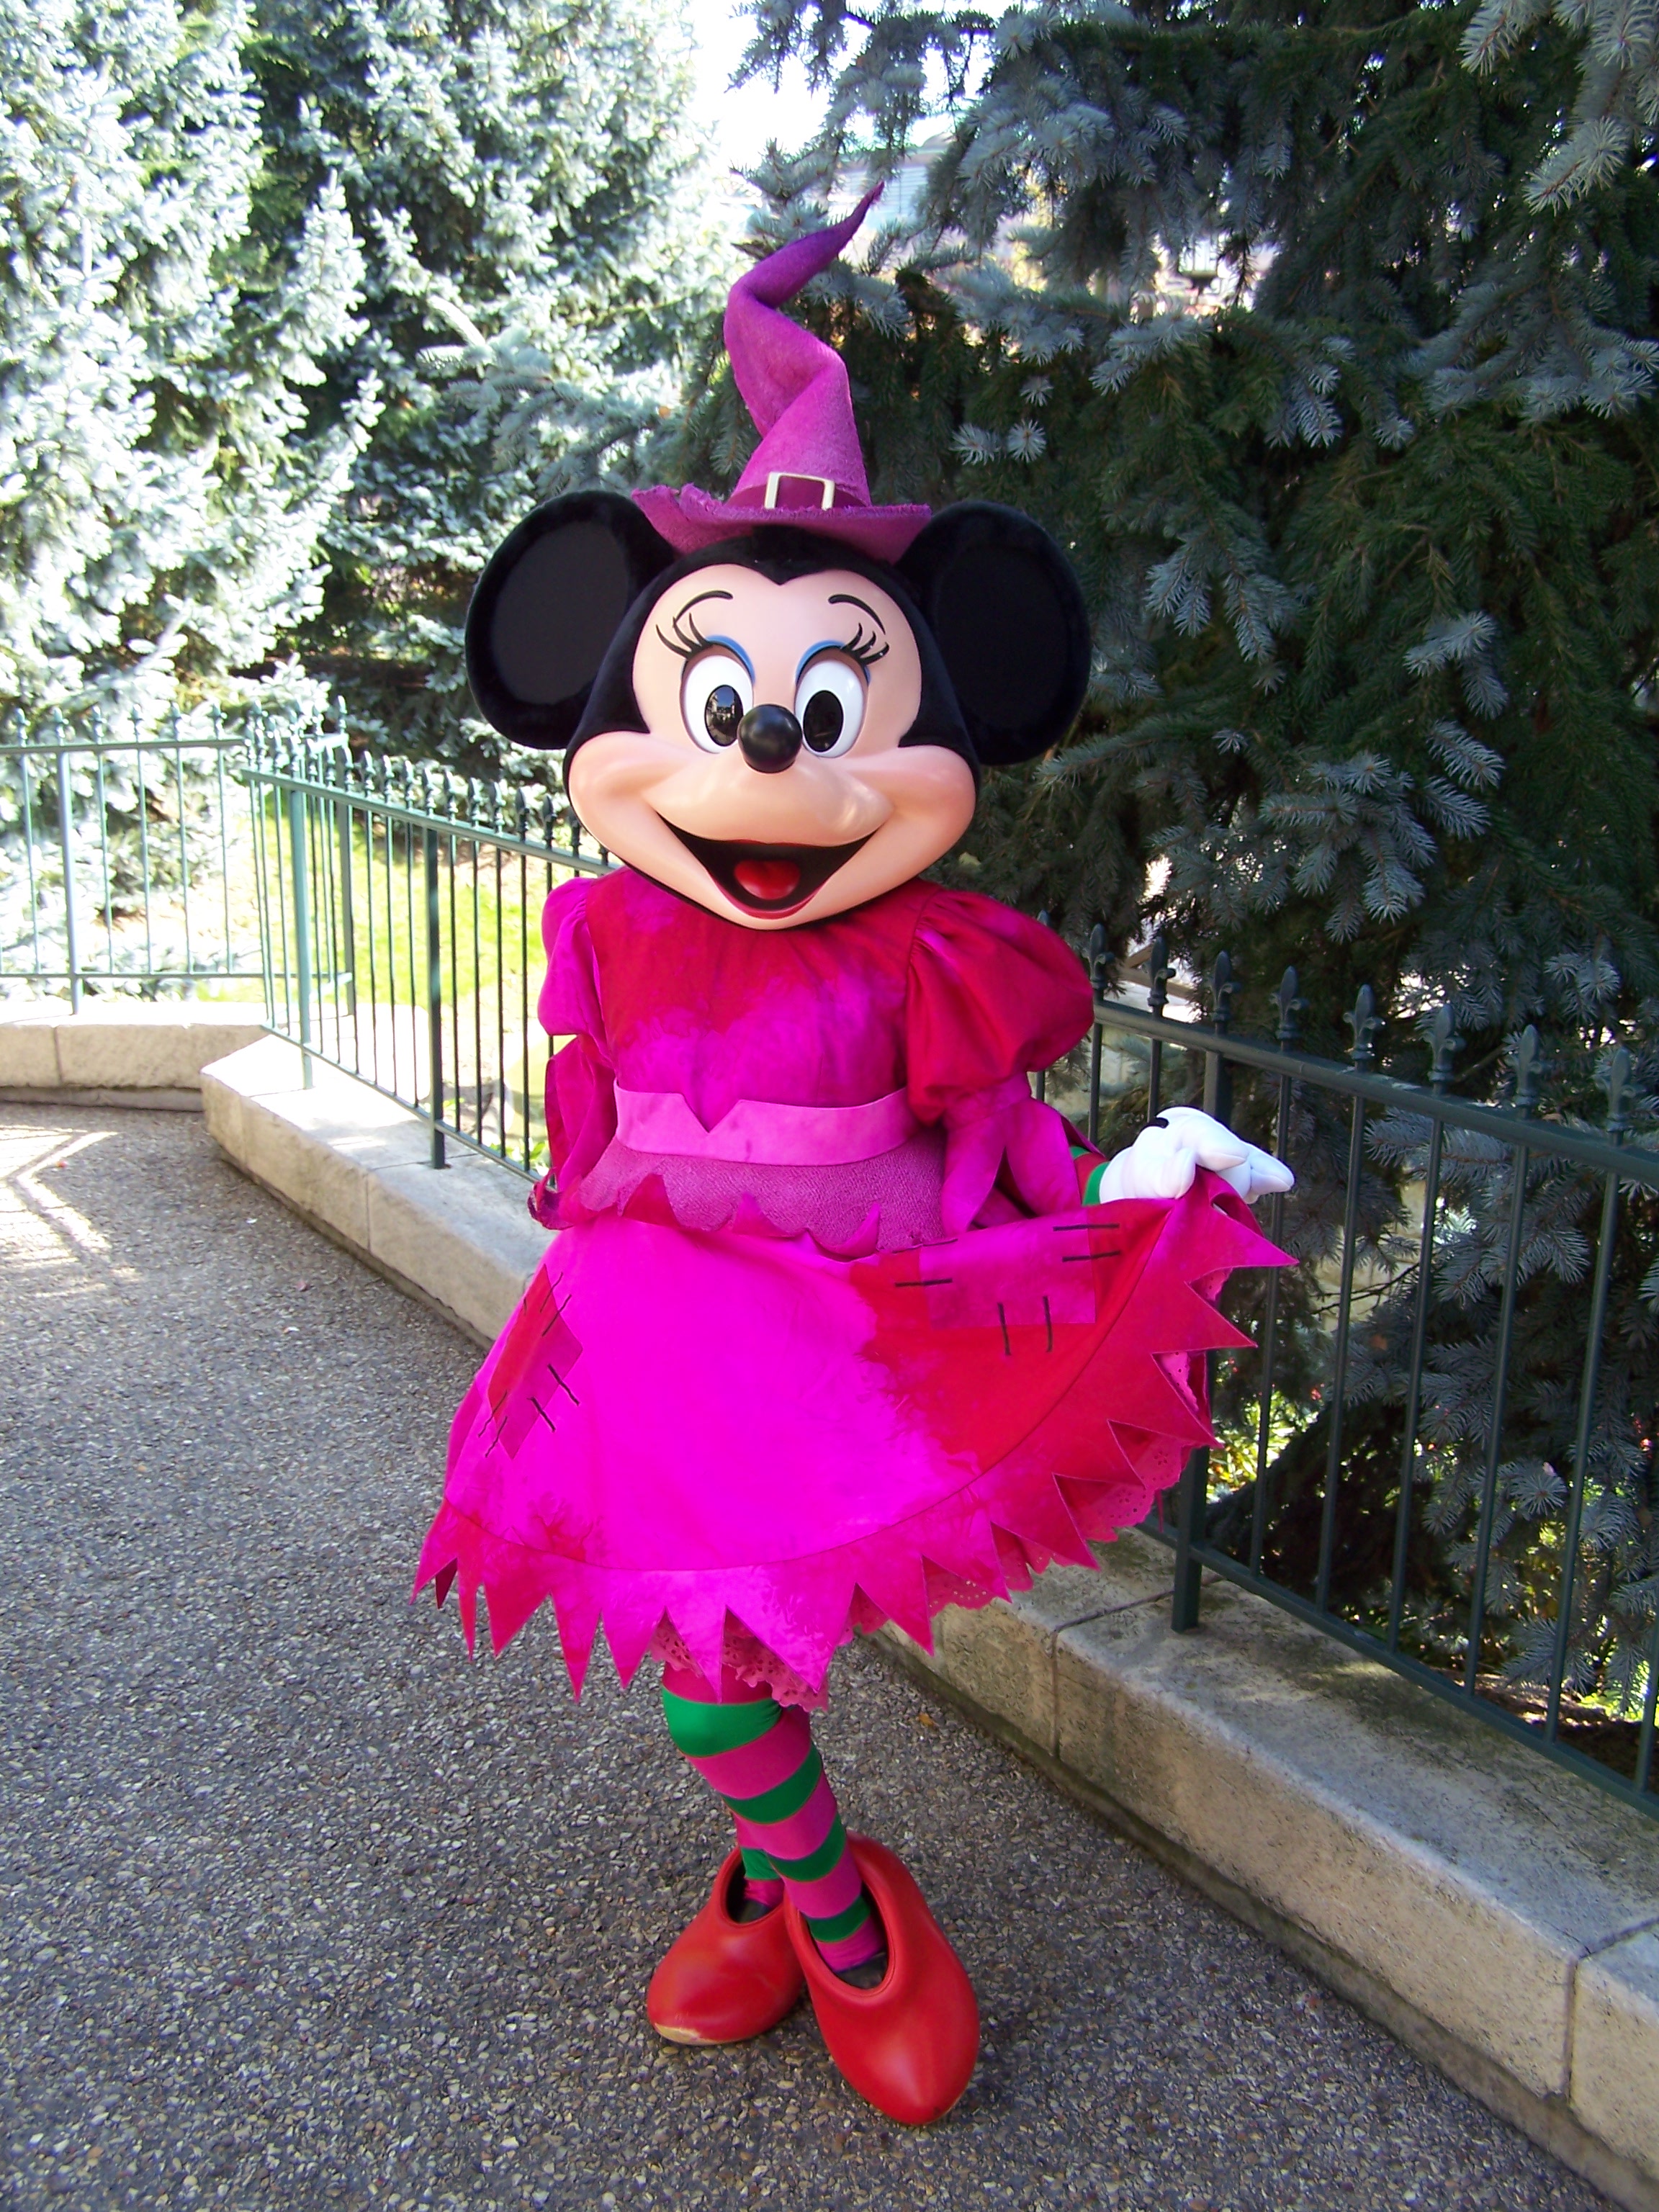 In 2007 Minnie was wearing her pink with outfit during several mini shows in the Disneyland Park.